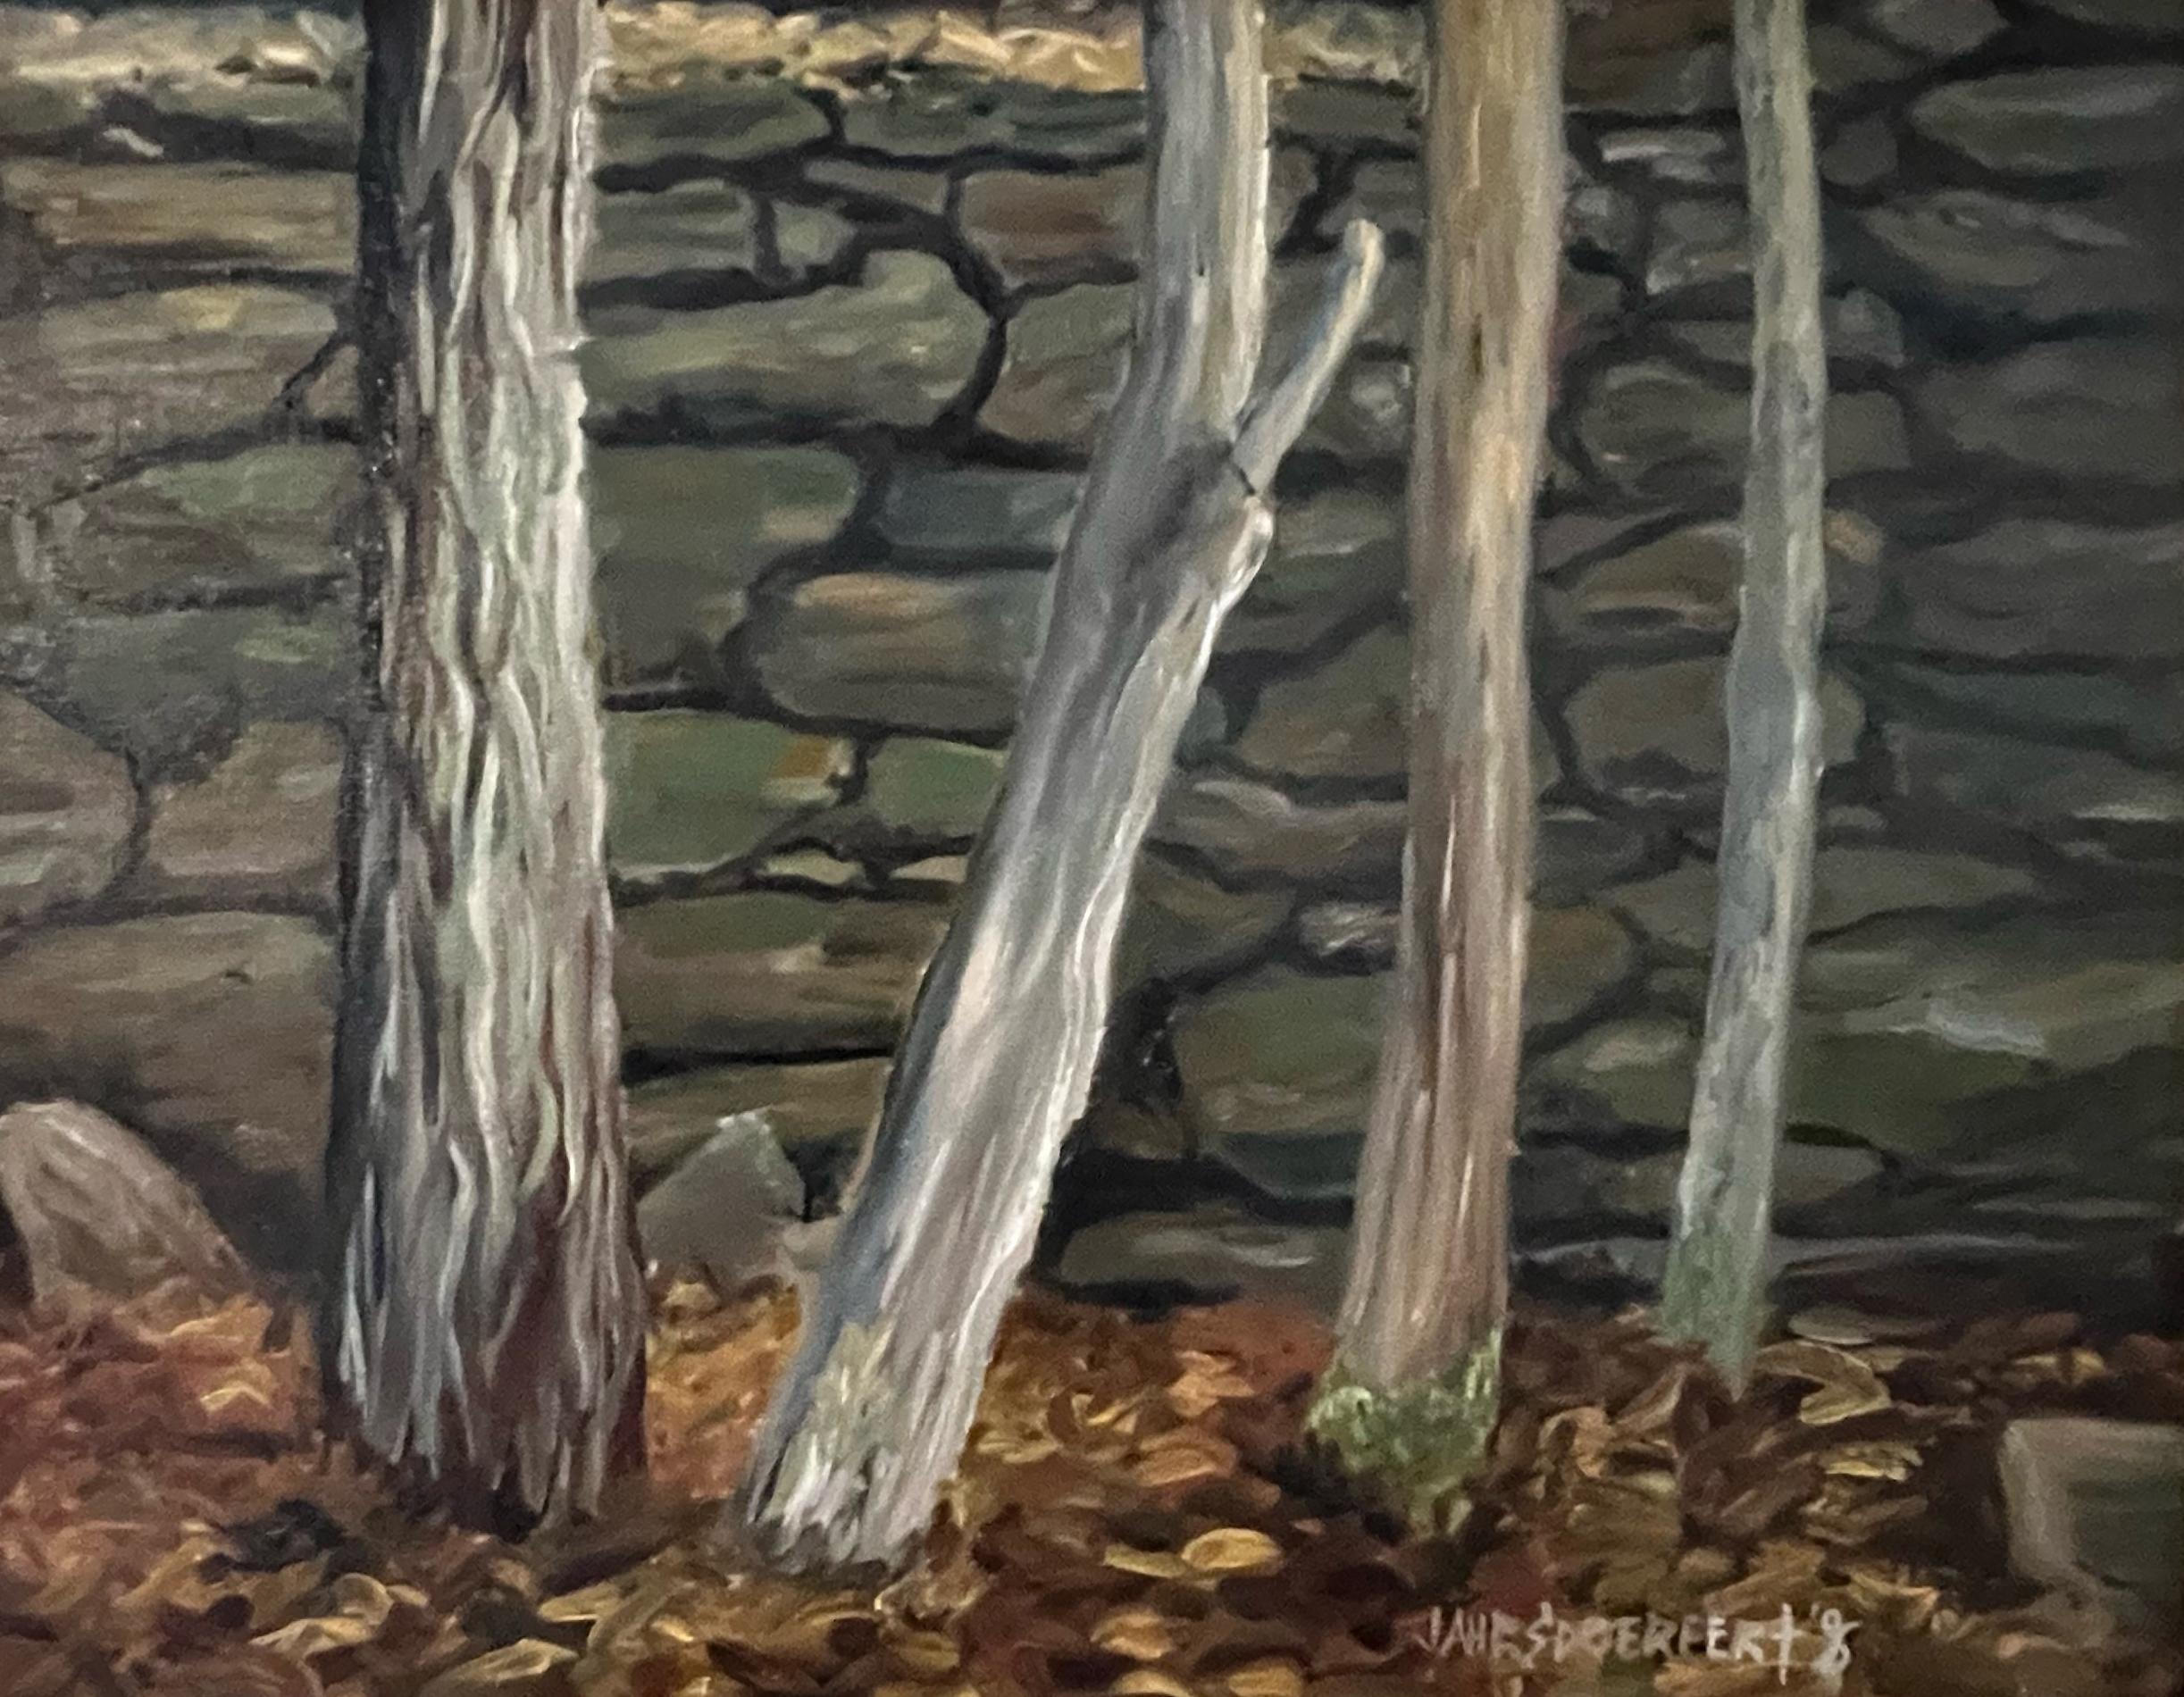 James Jahrsdoerfer, "Vermont Wall", Tree Rock Wall Oil Painting on Canvas